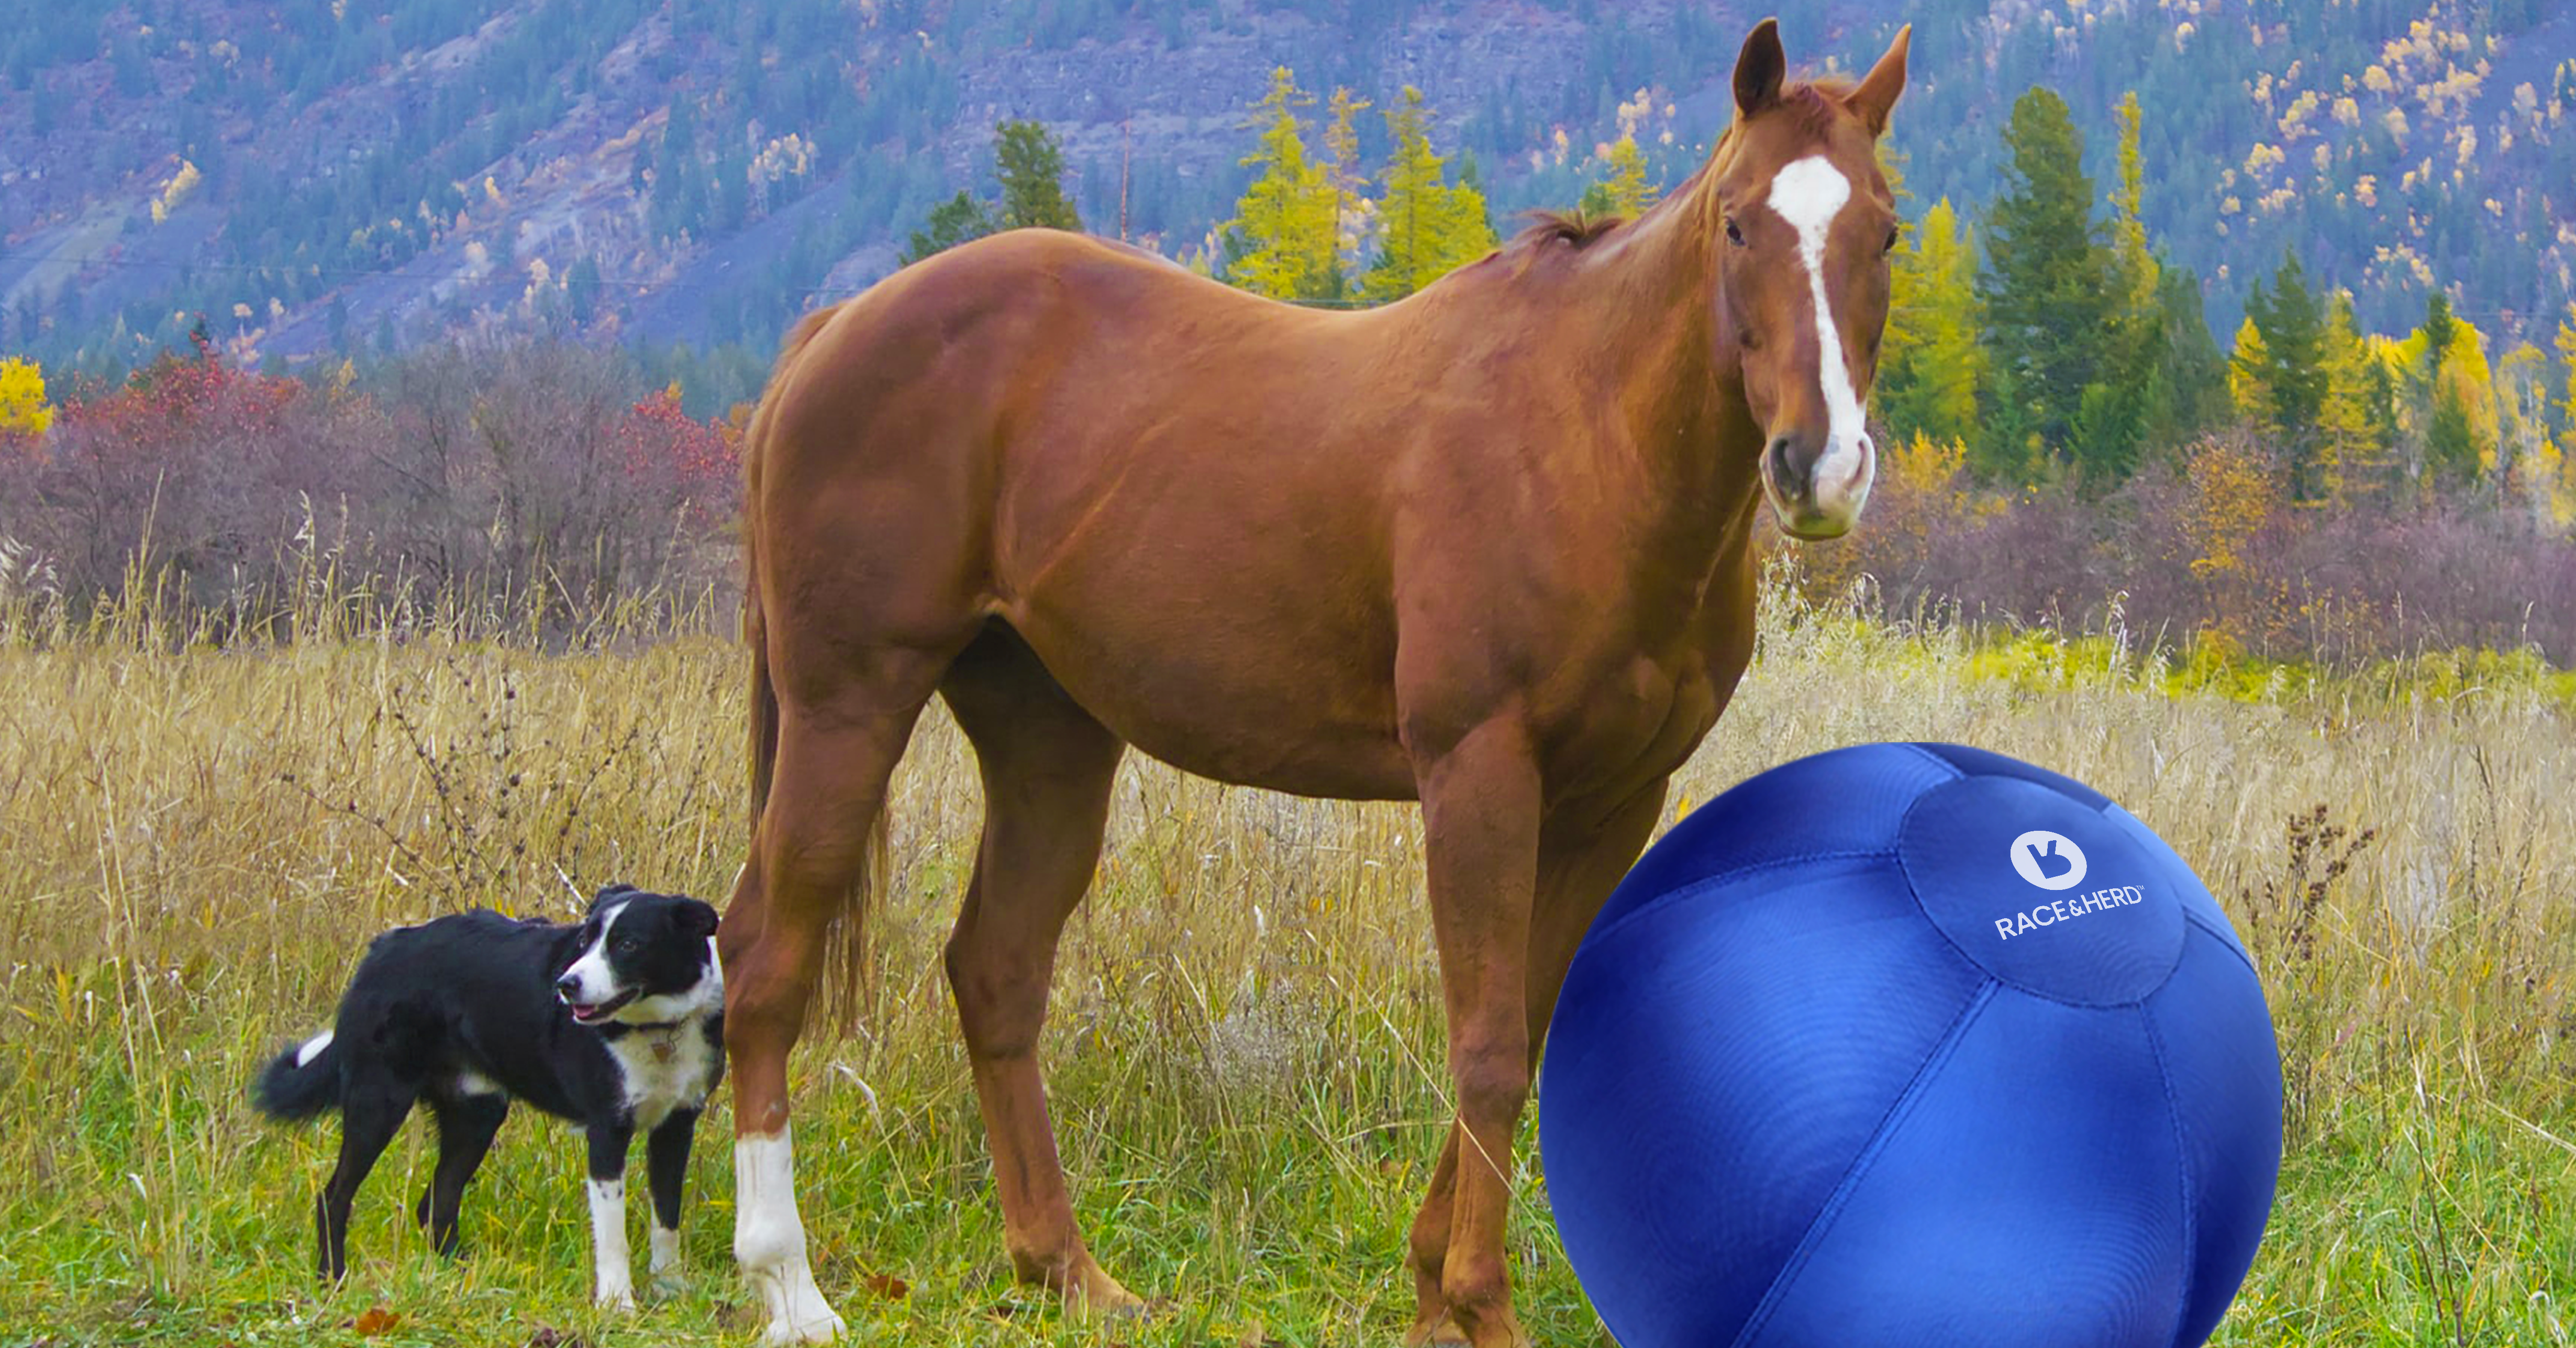 What Are Horse Ball Toys For Race